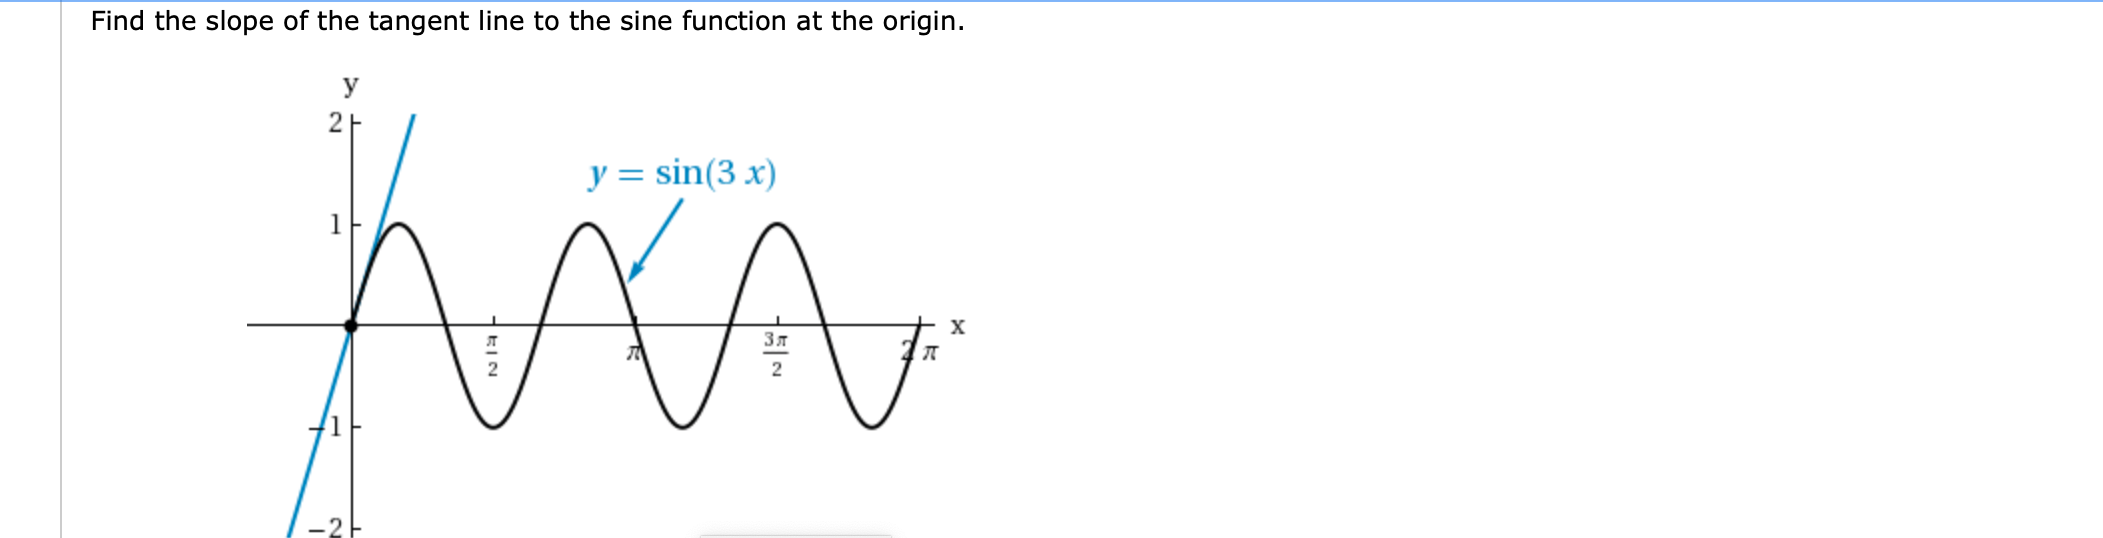 Find the slope of the tangent line to the sine function at the origin.
y
y = sin(3 x)
